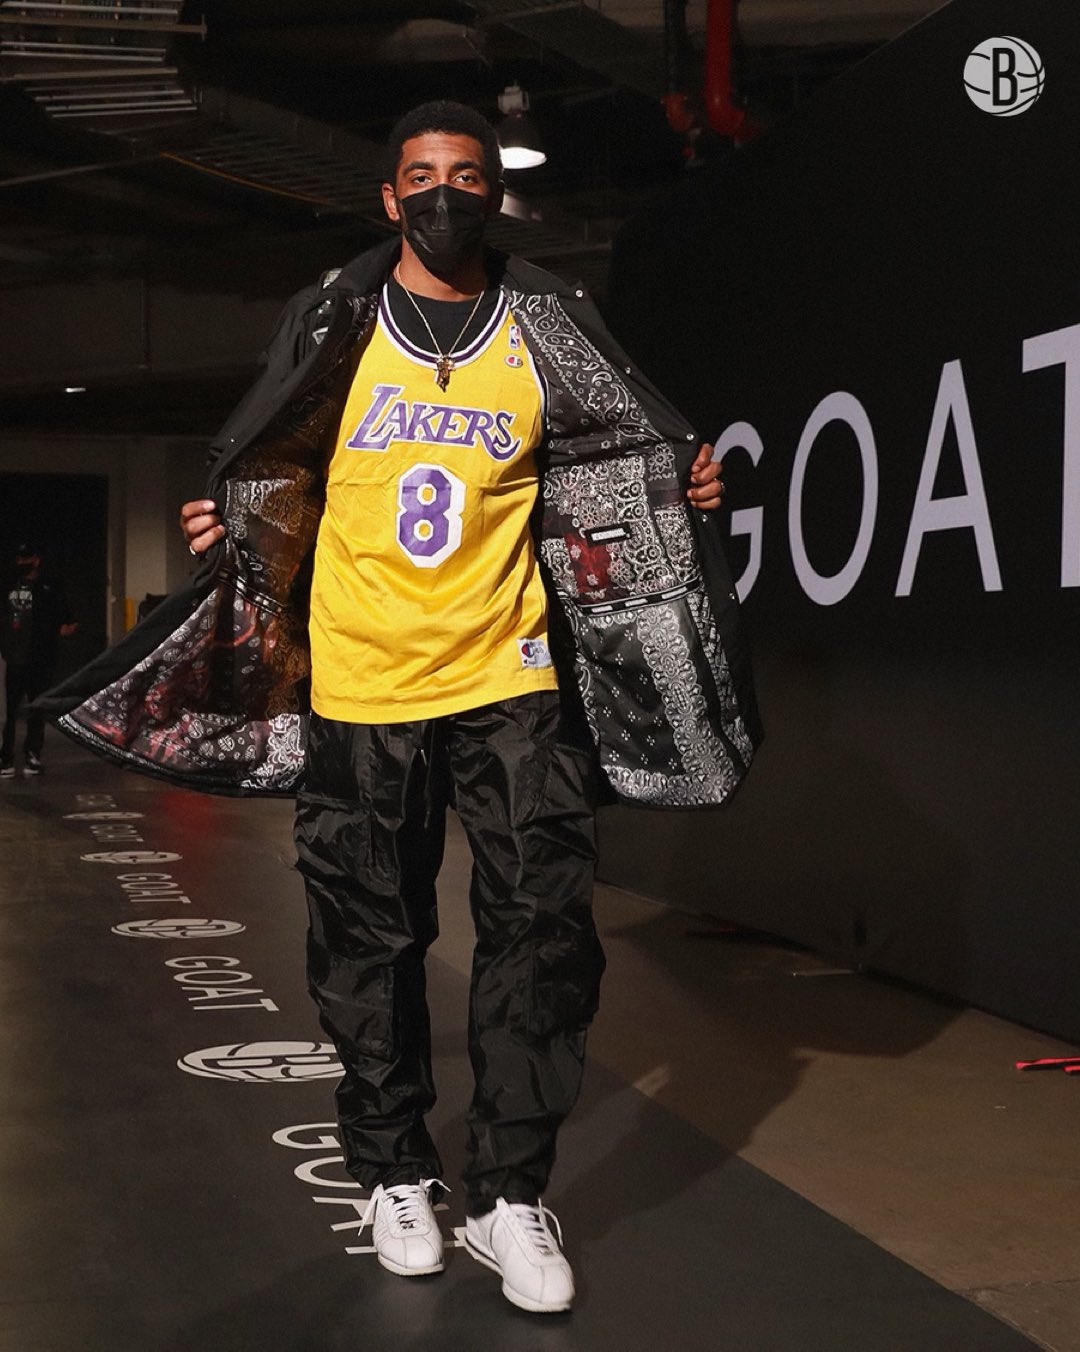 kyrie-irving-pays-tribute-to-kobe-bryant-wearing-his-8-jersey